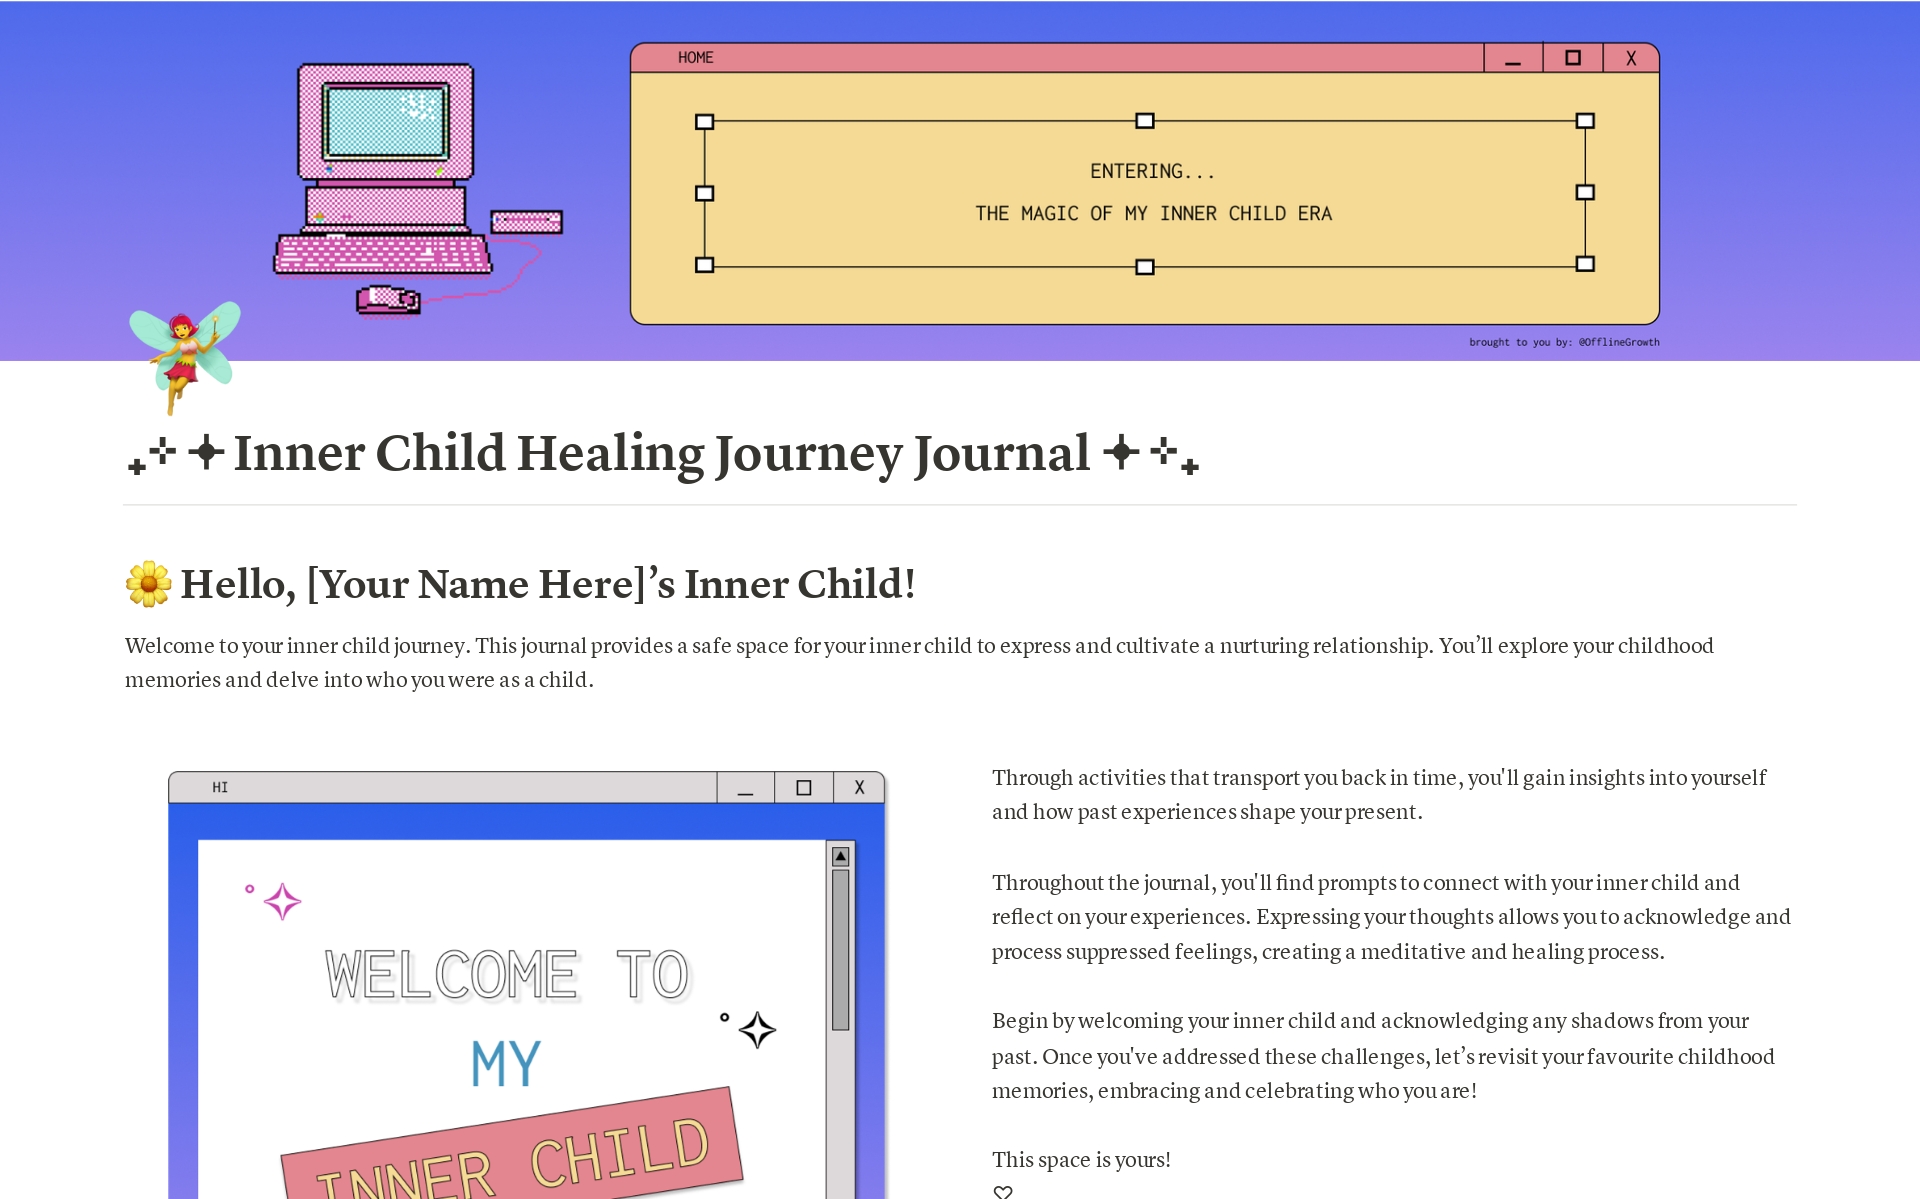 🧚‍♀️ For your inner child healing journey, offering a space to connect with your inner child and express your inner thoughts. You can customise the journal or add more prompts if you like.